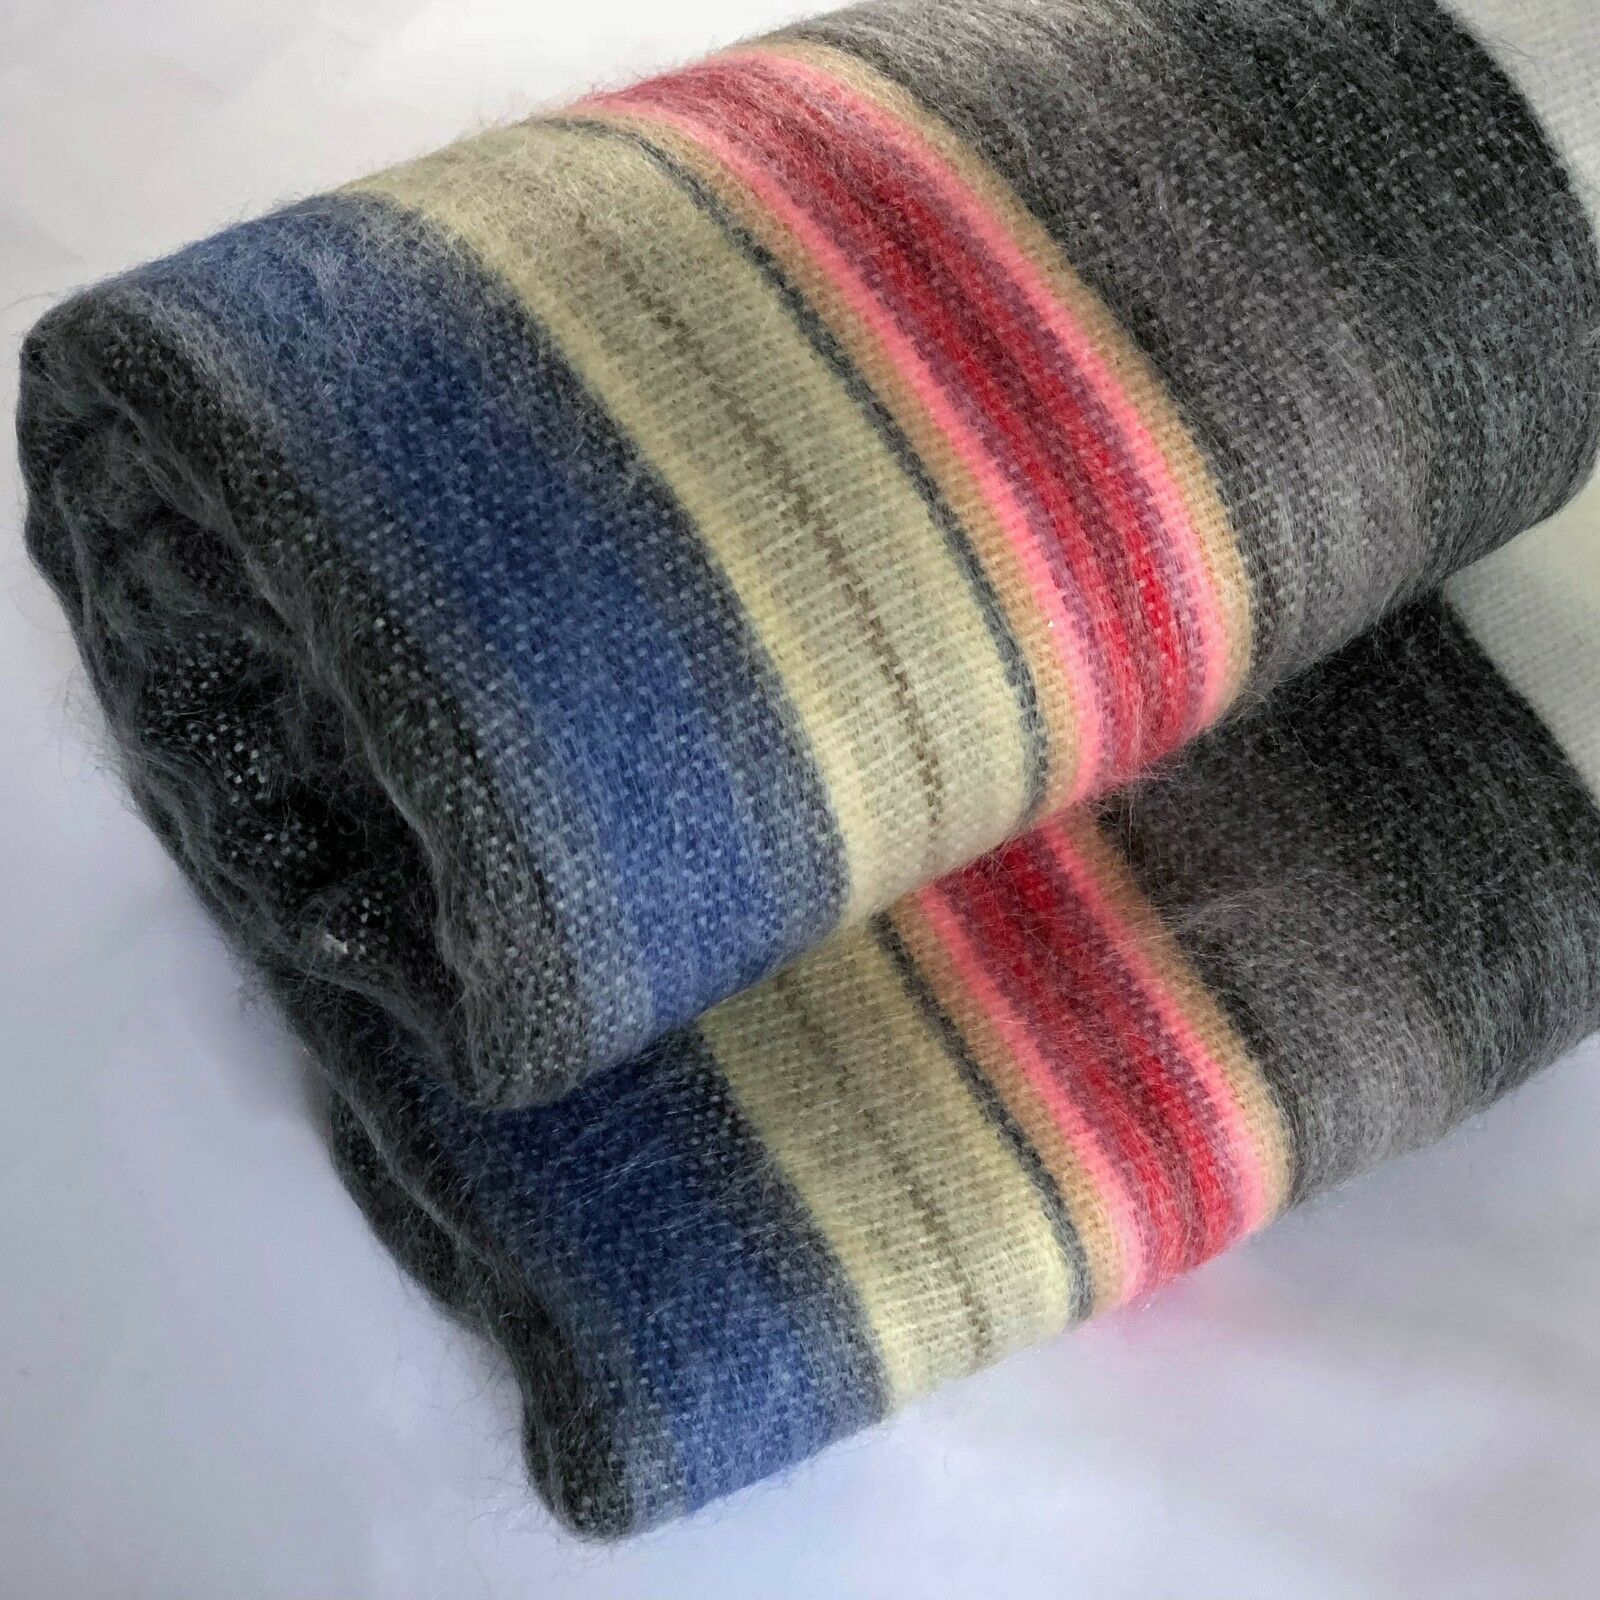 Siguitag - Baby Alpaca Wool Throw Blanket / Sofa Cover - Queen 90" x 65" - multi colored thin stripes pattern